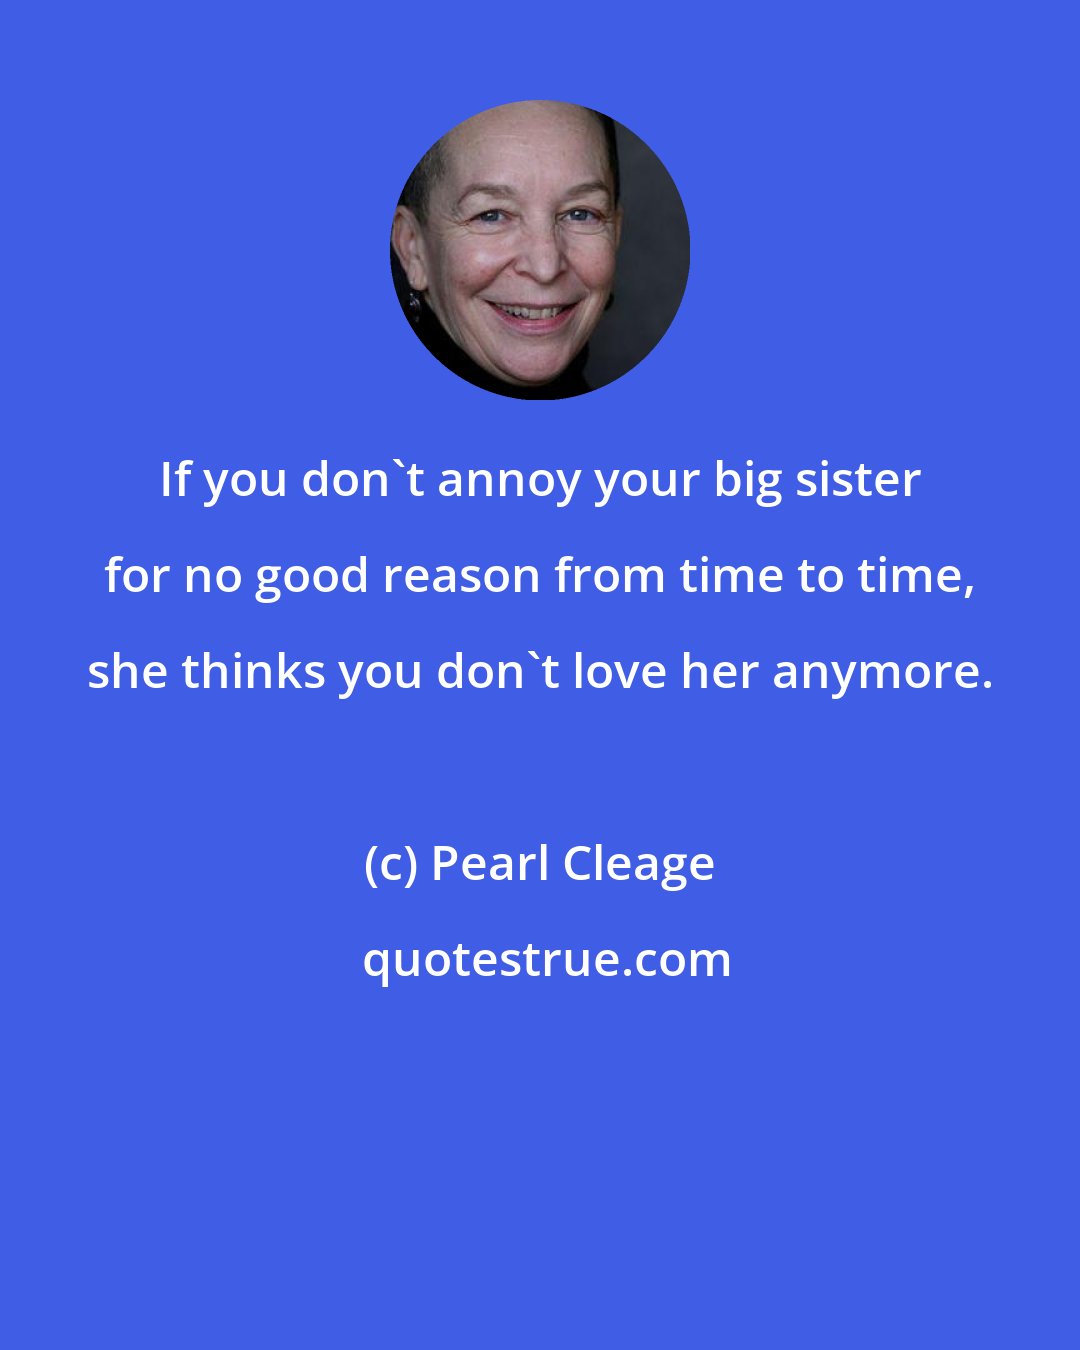 Pearl Cleage: If you don't annoy your big sister for no good reason from time to time, she thinks you don't love her anymore.